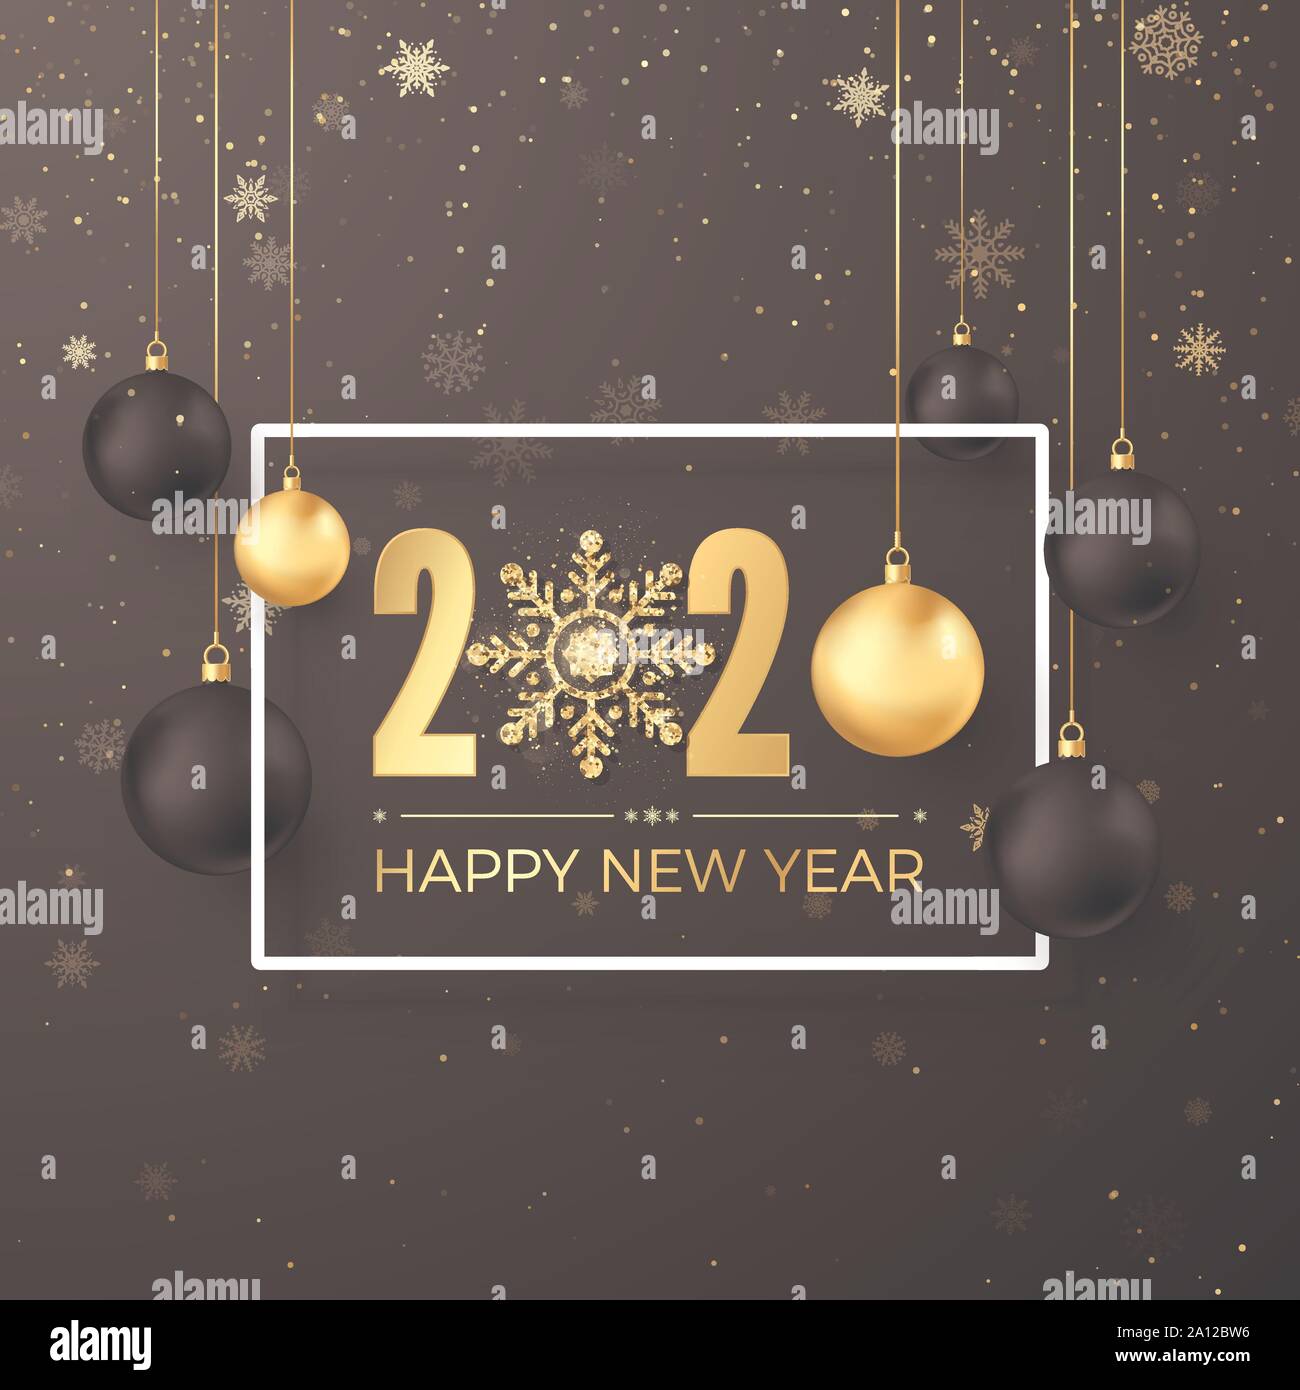 Christmas Decoration Elements. Greeting golden numbers 2020 and text Happy New Year on dark background in white frame. Black and golden hanging Christ Stock Vector